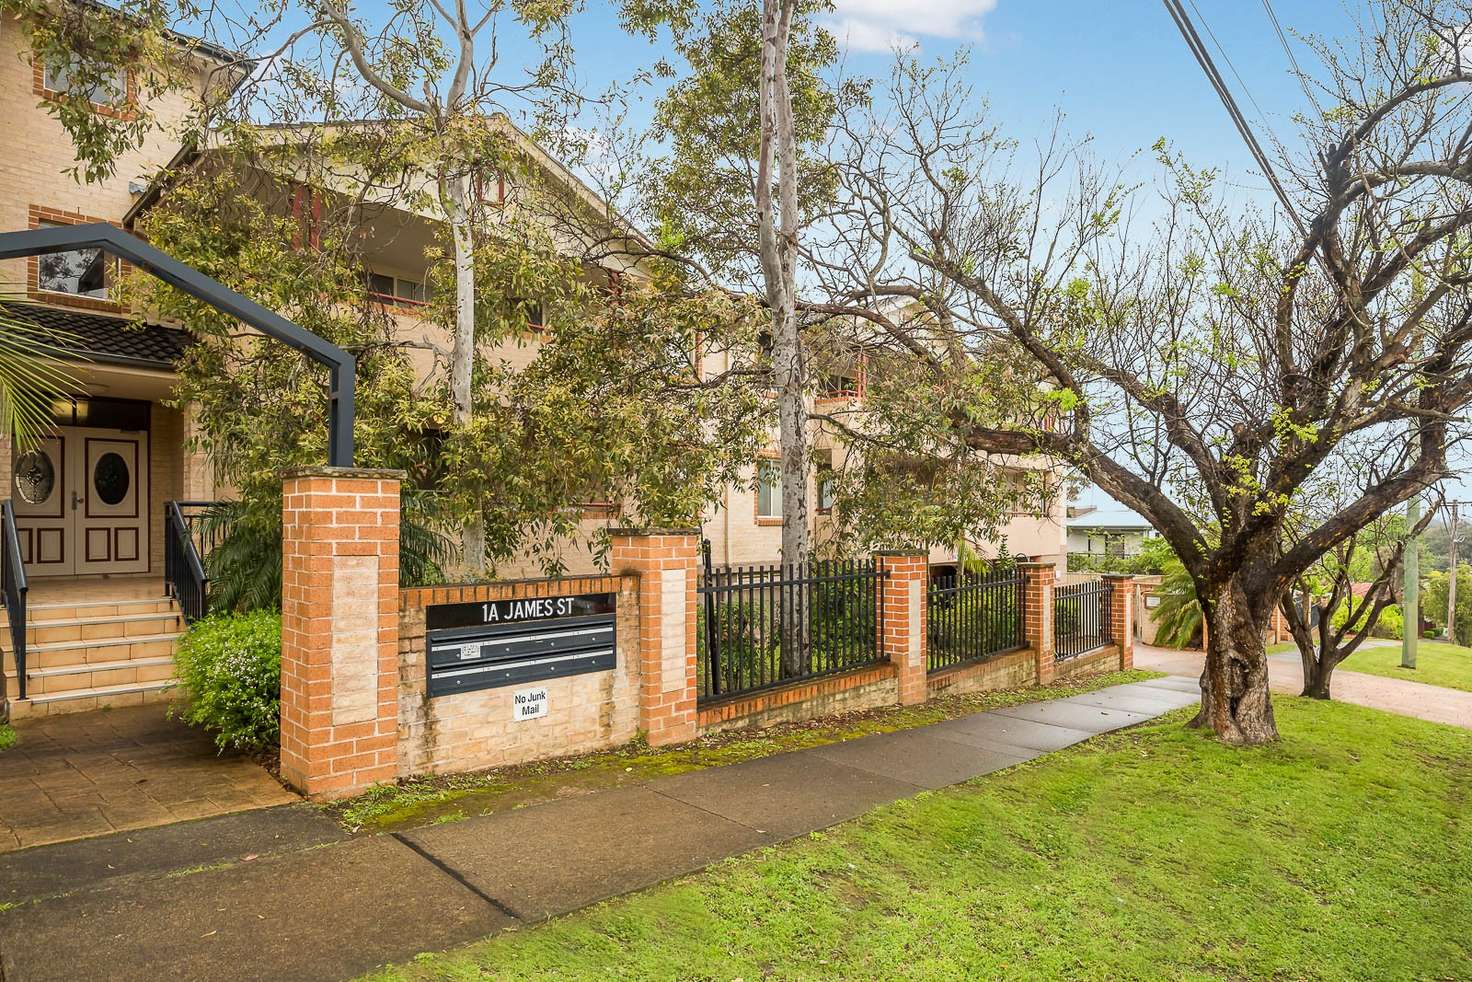 Main view of Homely unit listing, 3/1a James Street, Baulkham Hills NSW 2153